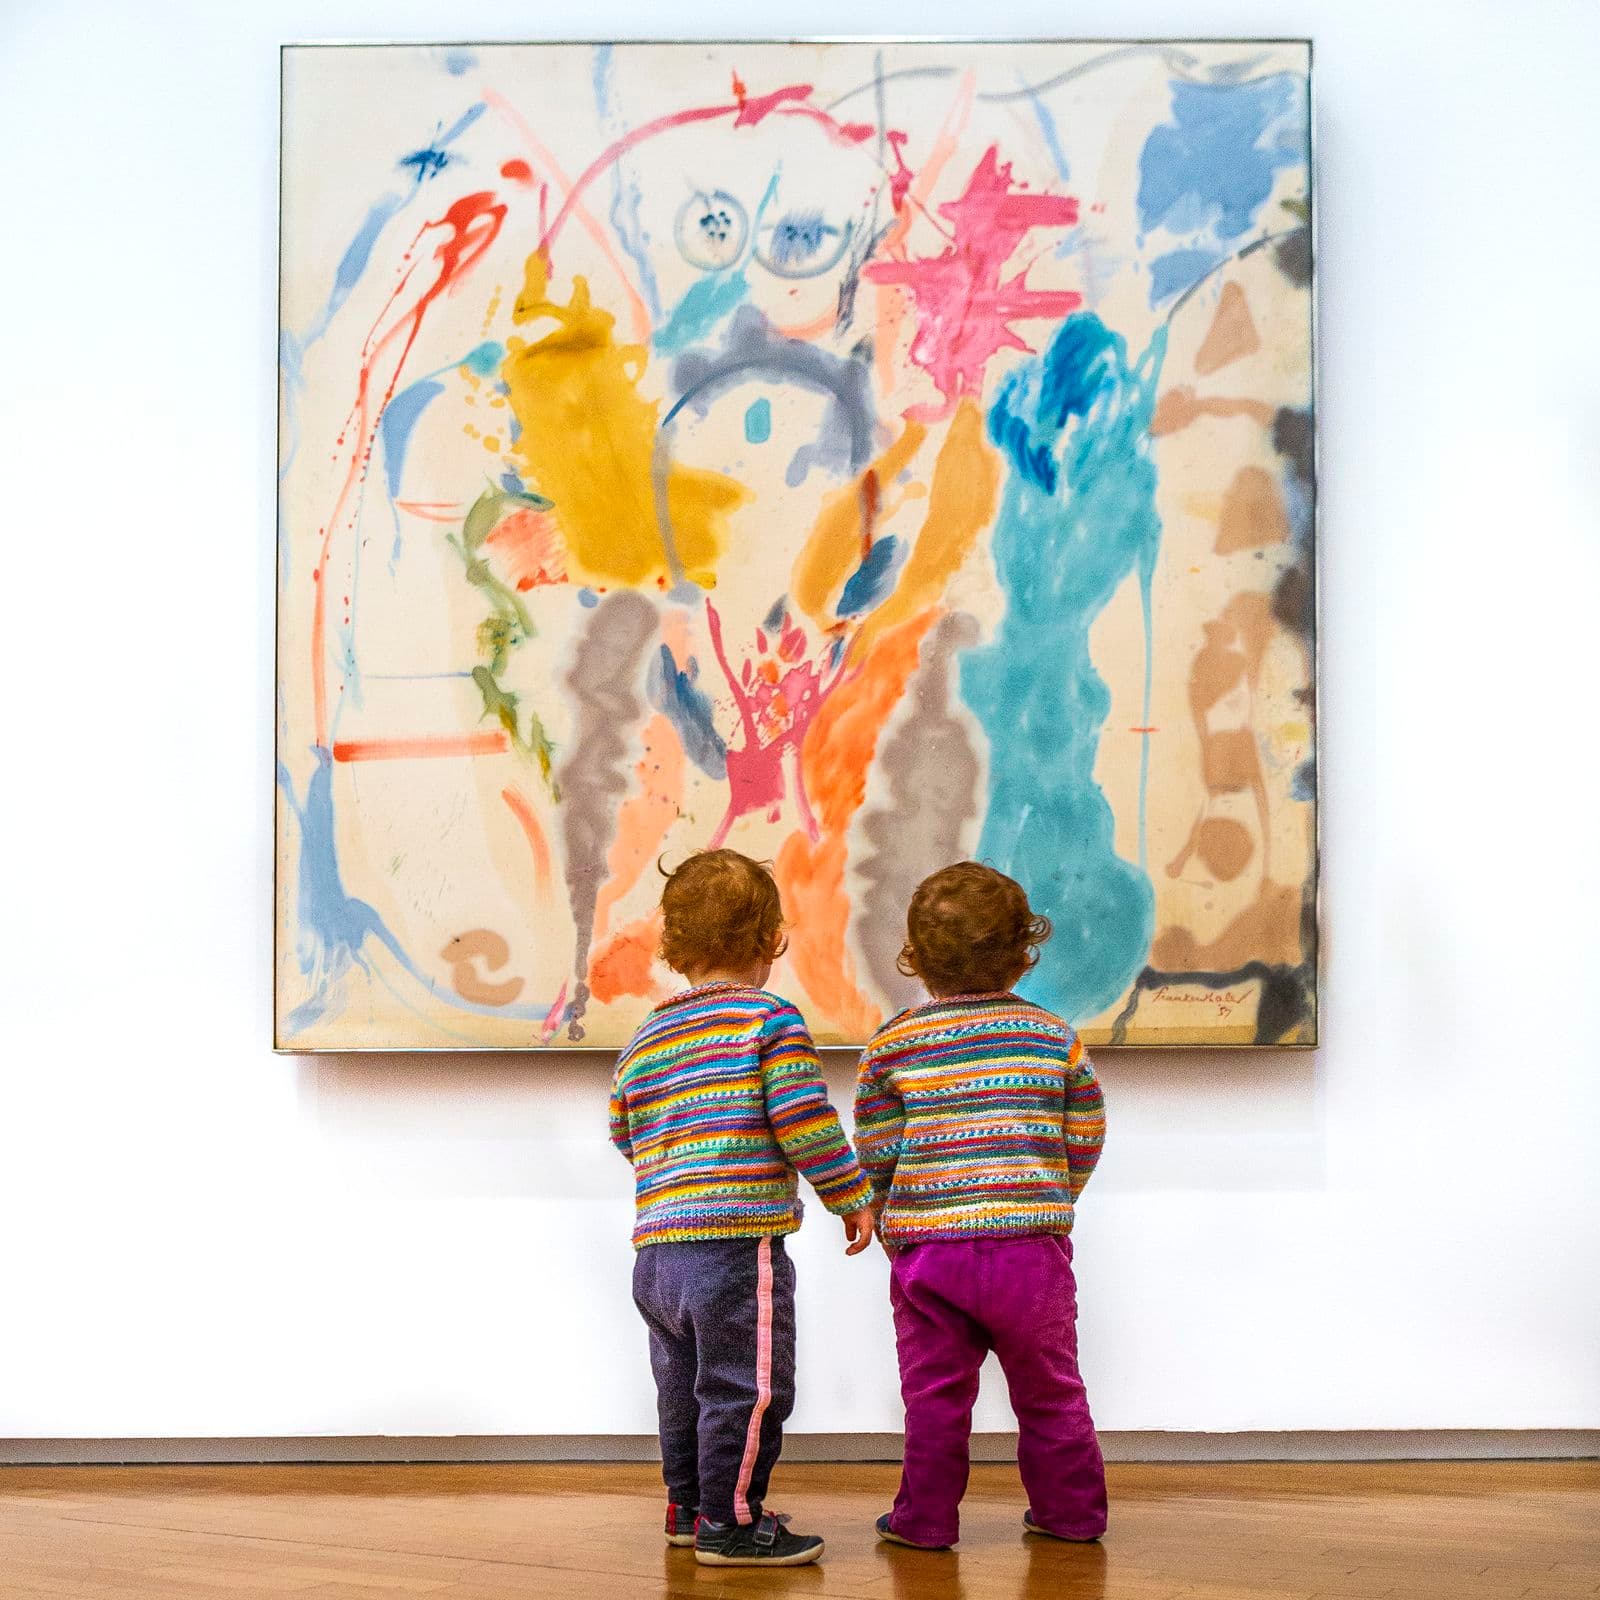 Two small children stand in front of a large painting